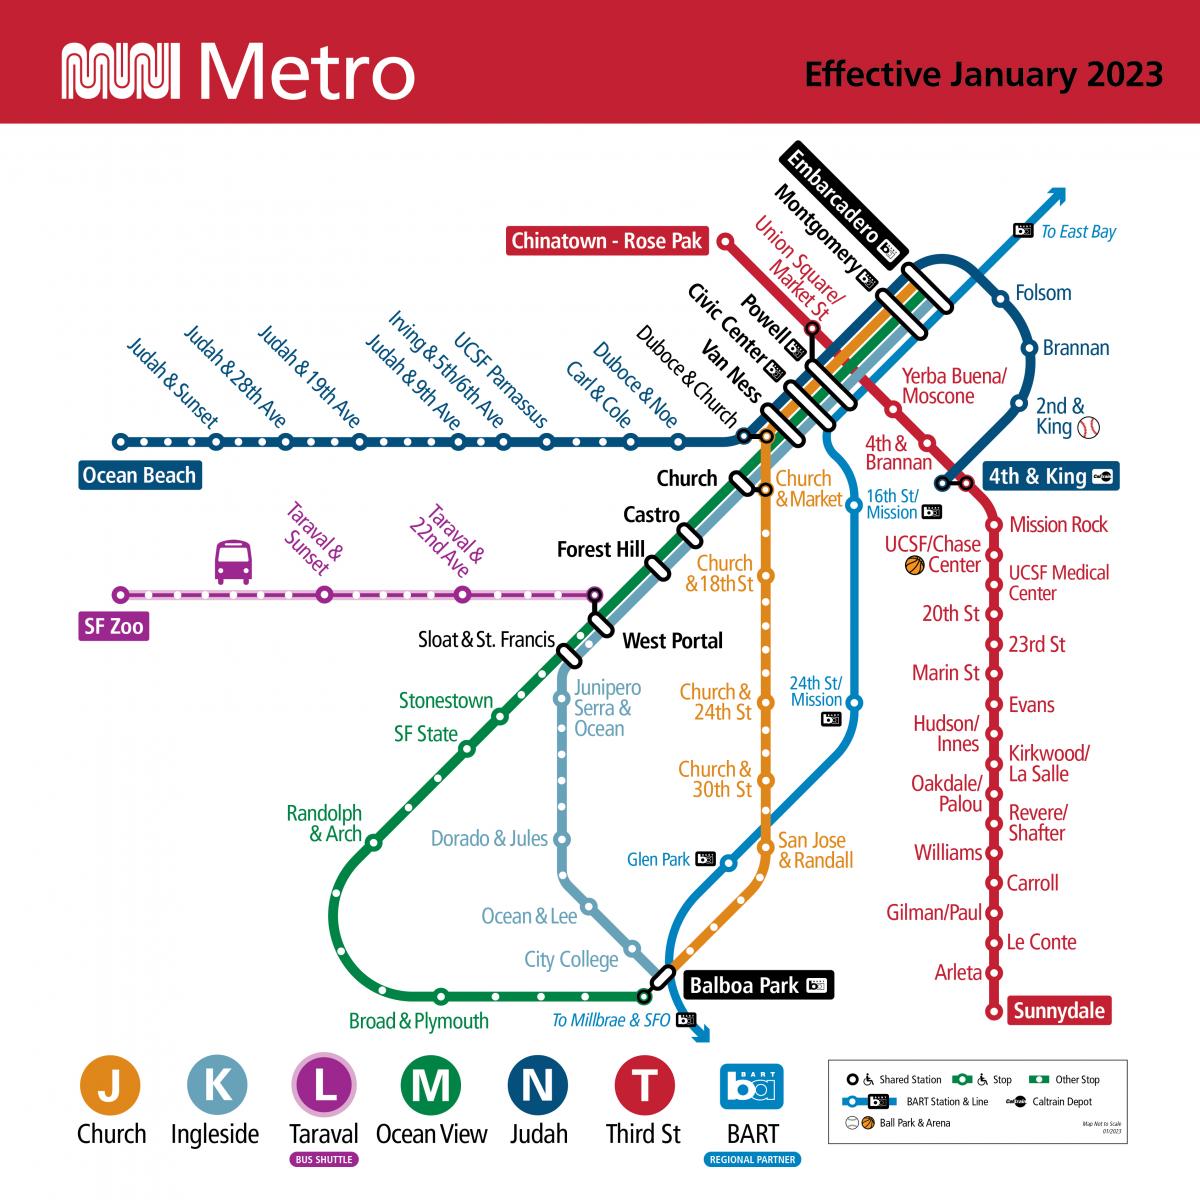 A map of the Central Subway line effective January 2023.